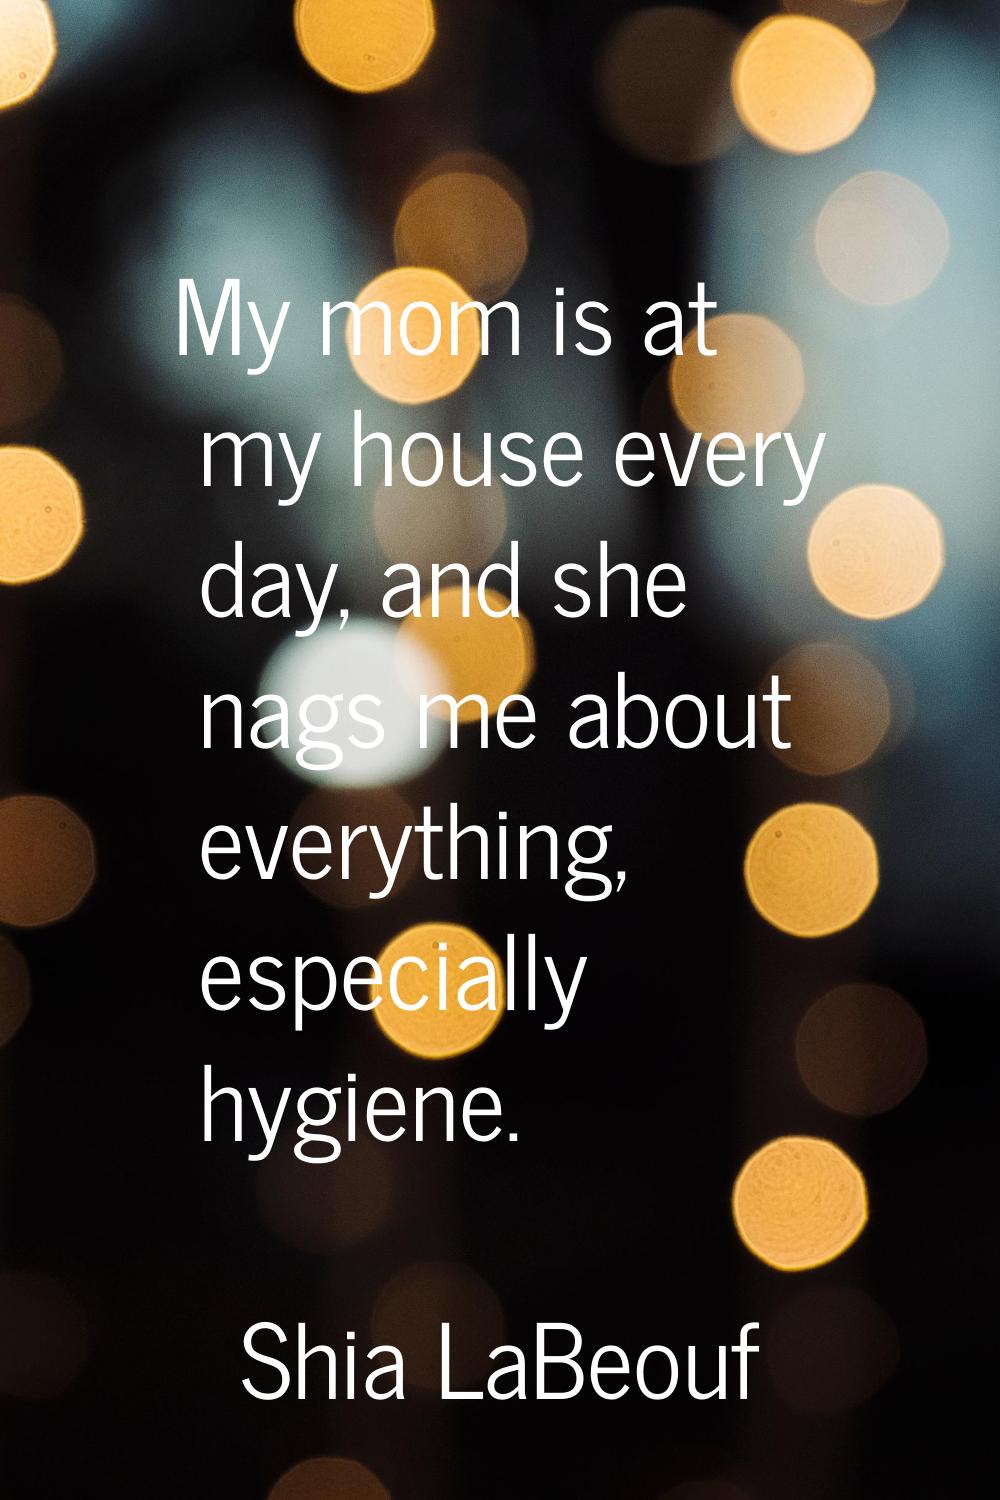 My mom is at my house every day, and she nags me about everything, especially hygiene.